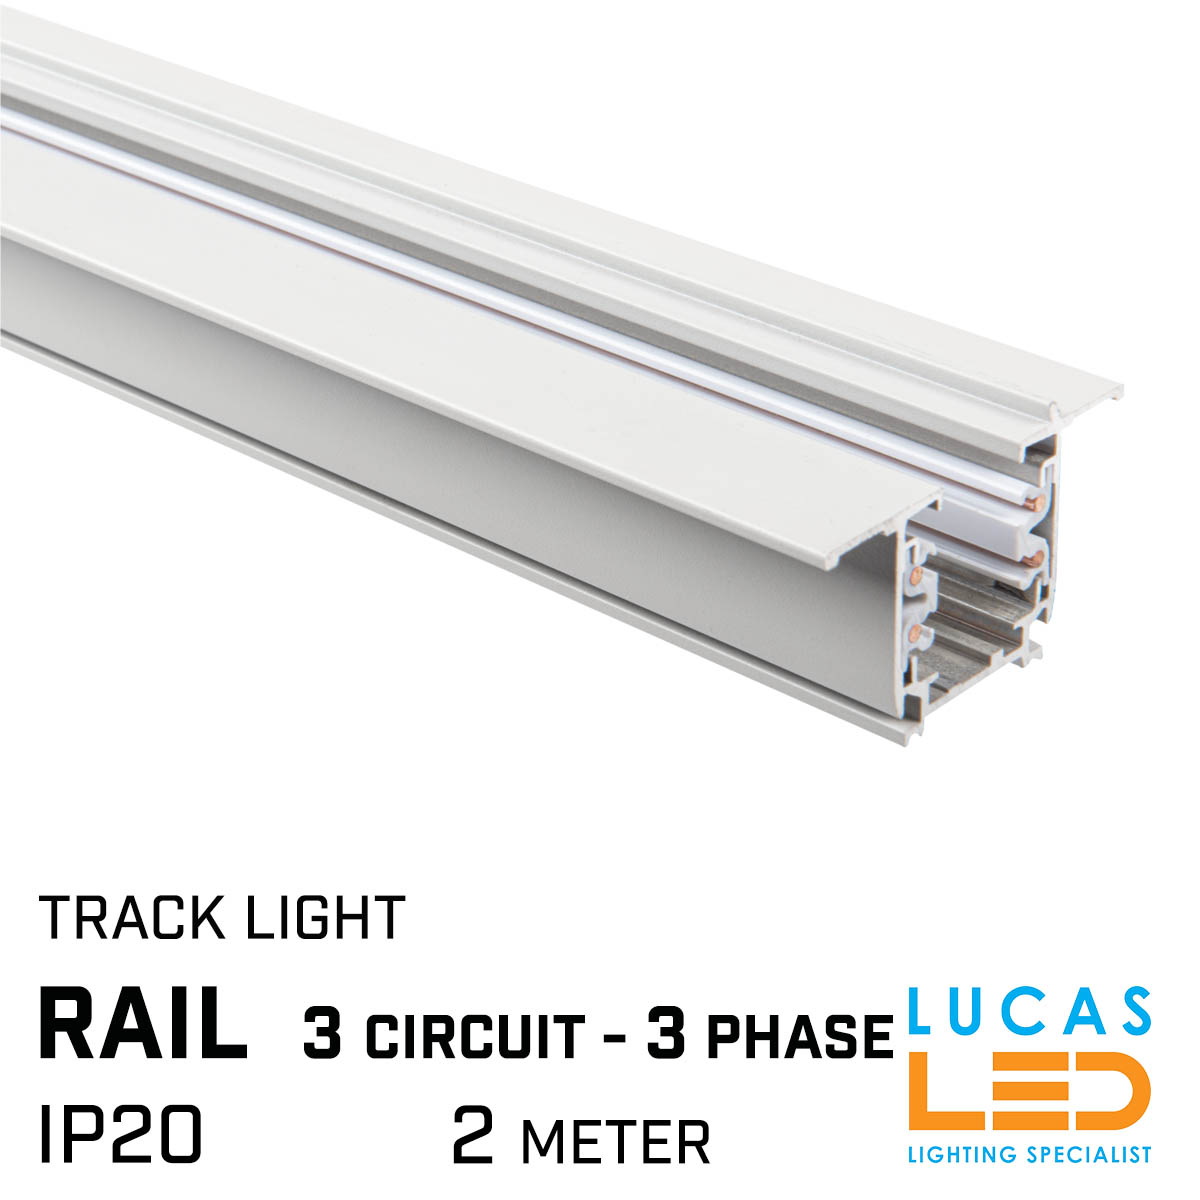 Recessed 2 meter Power RAIL track 3 circuit -  3 phase - for LED Track Lights - White